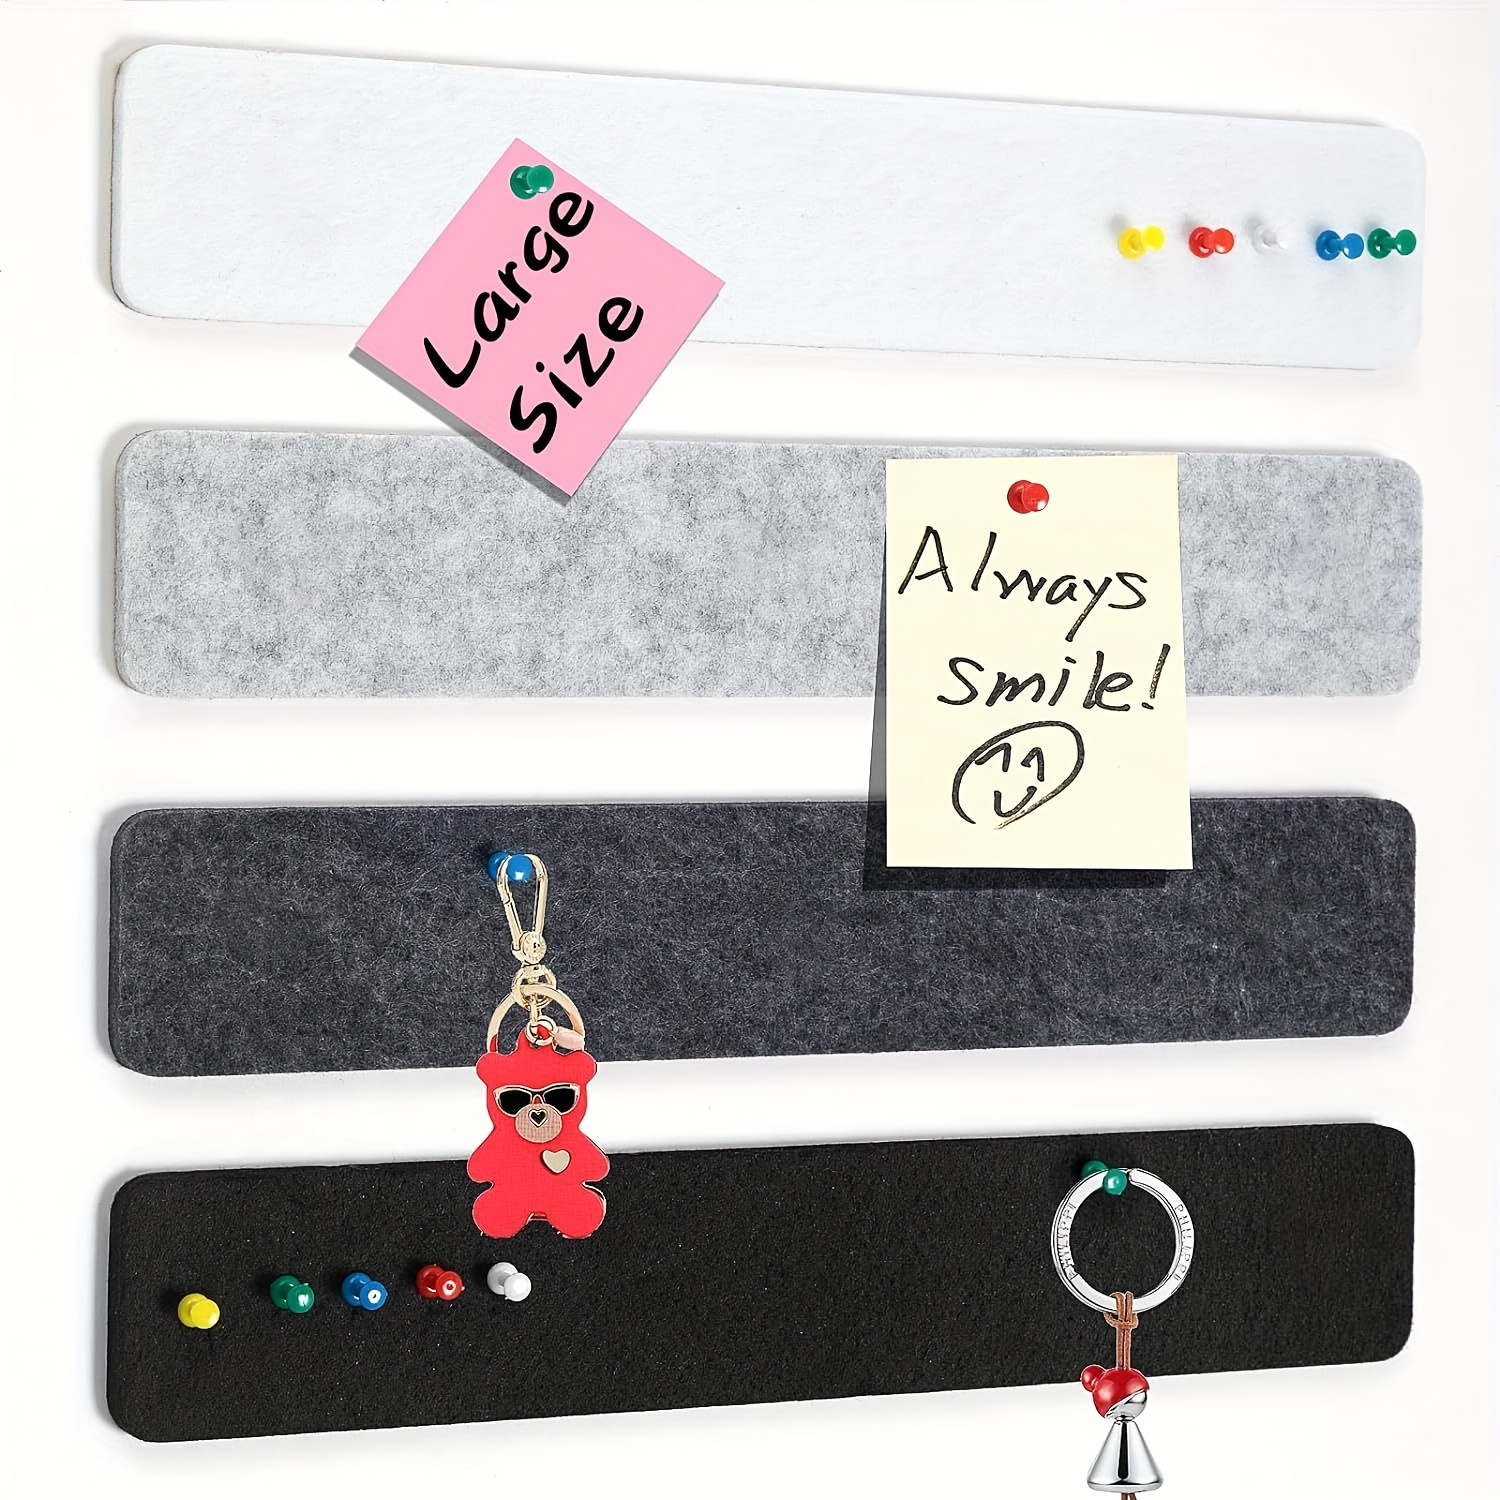 

Felt Notice Board, 4 Large Cork Strip Strips With 35 Pushpins, Self-adhesive And Will Not Damage The Wall, For Sticking Notes, Photos, Schedules In The Office Felt Pin Board (black, Gray, White)